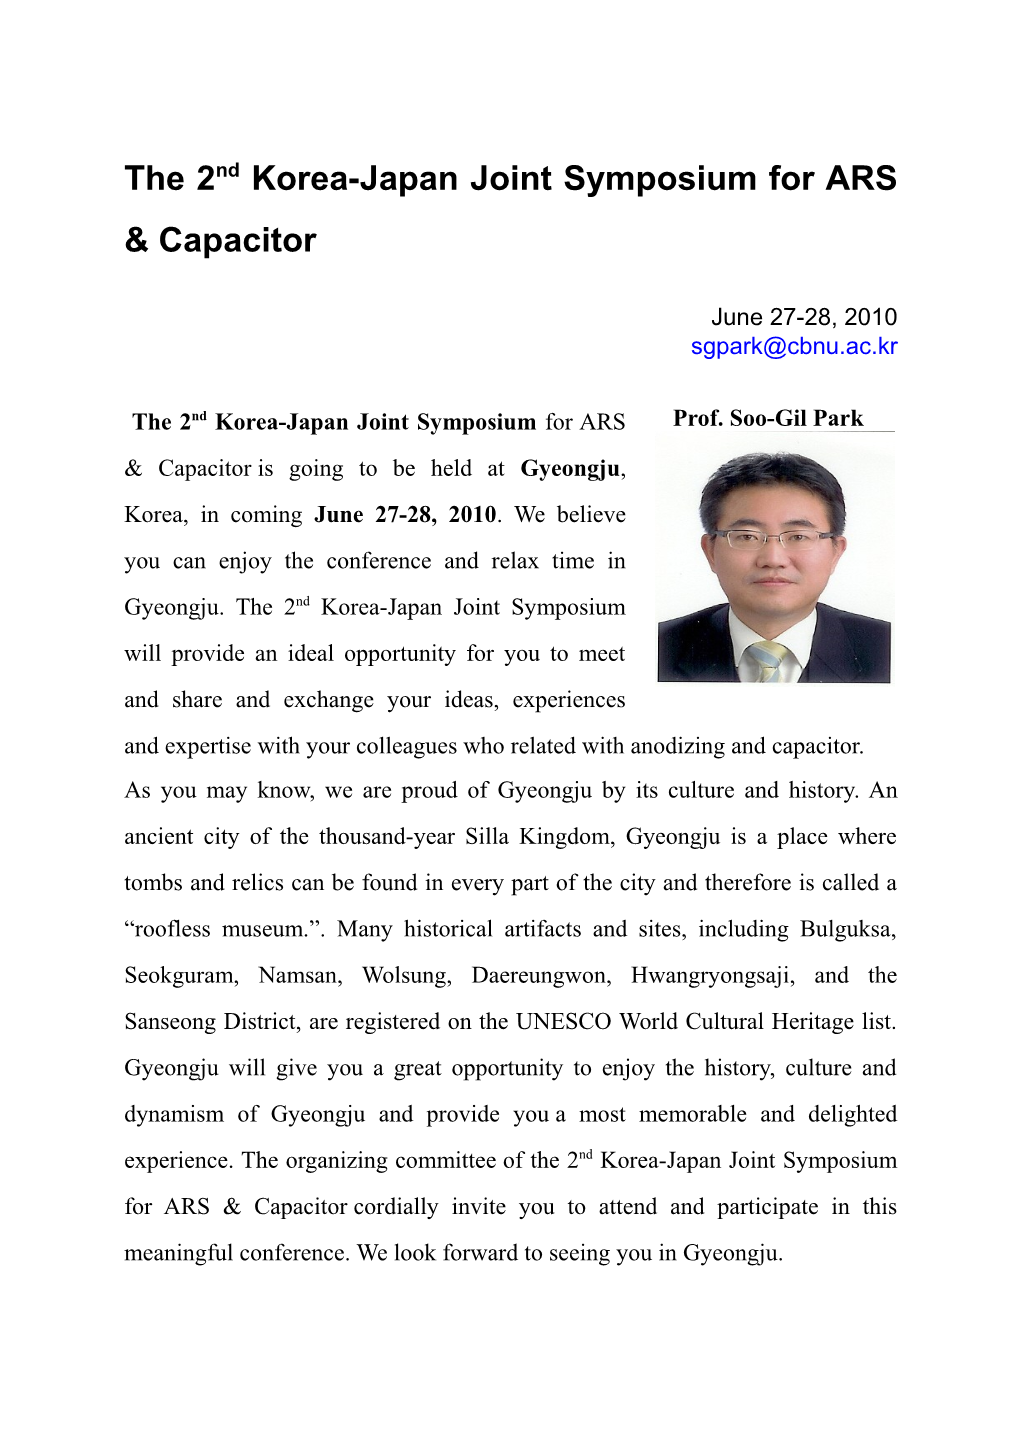 The 2Nd Korea-Japan Joint Symposium for ARS & Capacitor